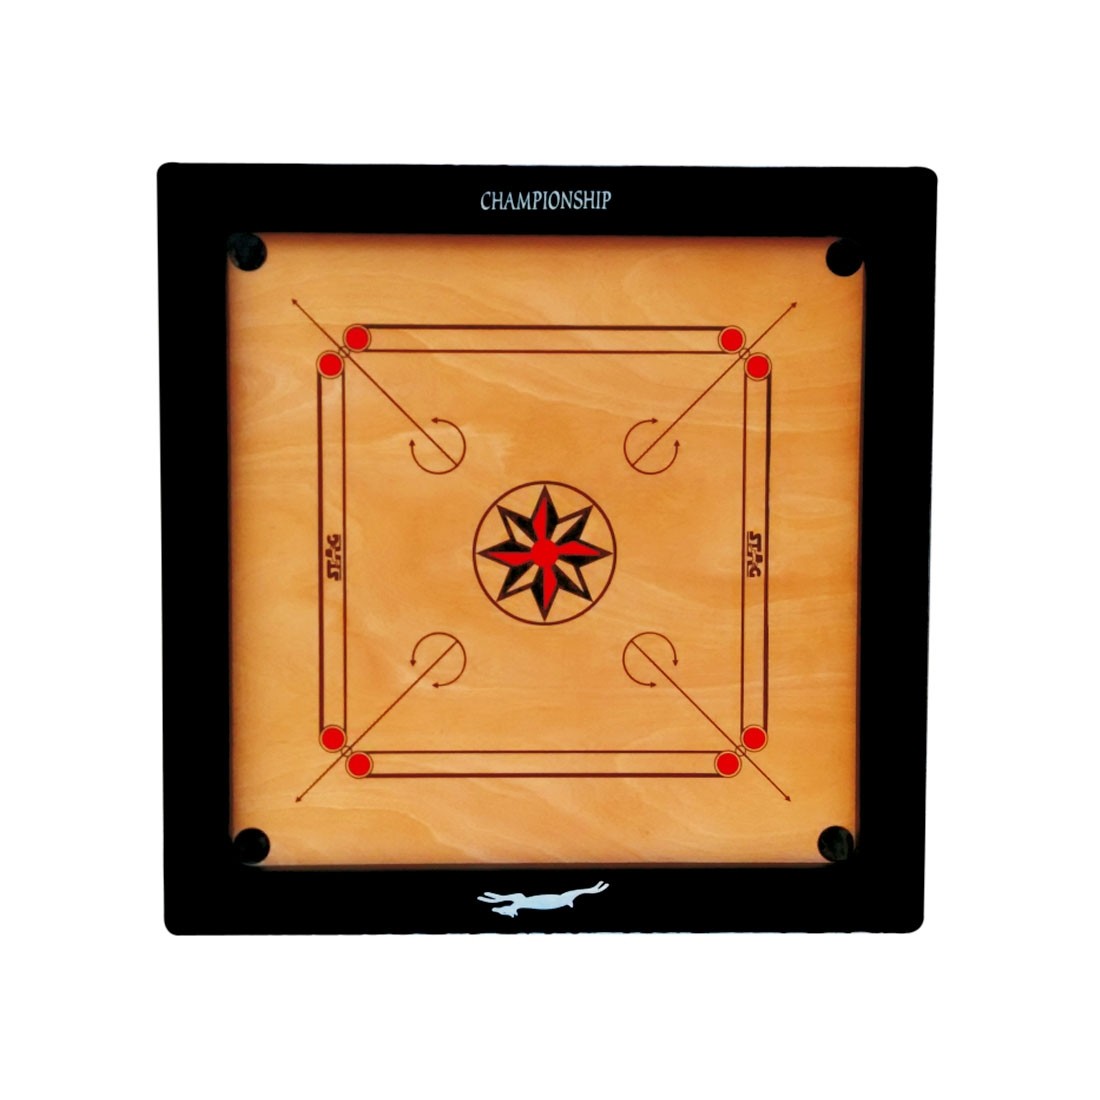 STAG CARROM BOARD CHAMPIONSHIP 4" BORDER 12MM M.D.F. WITH WHEELS